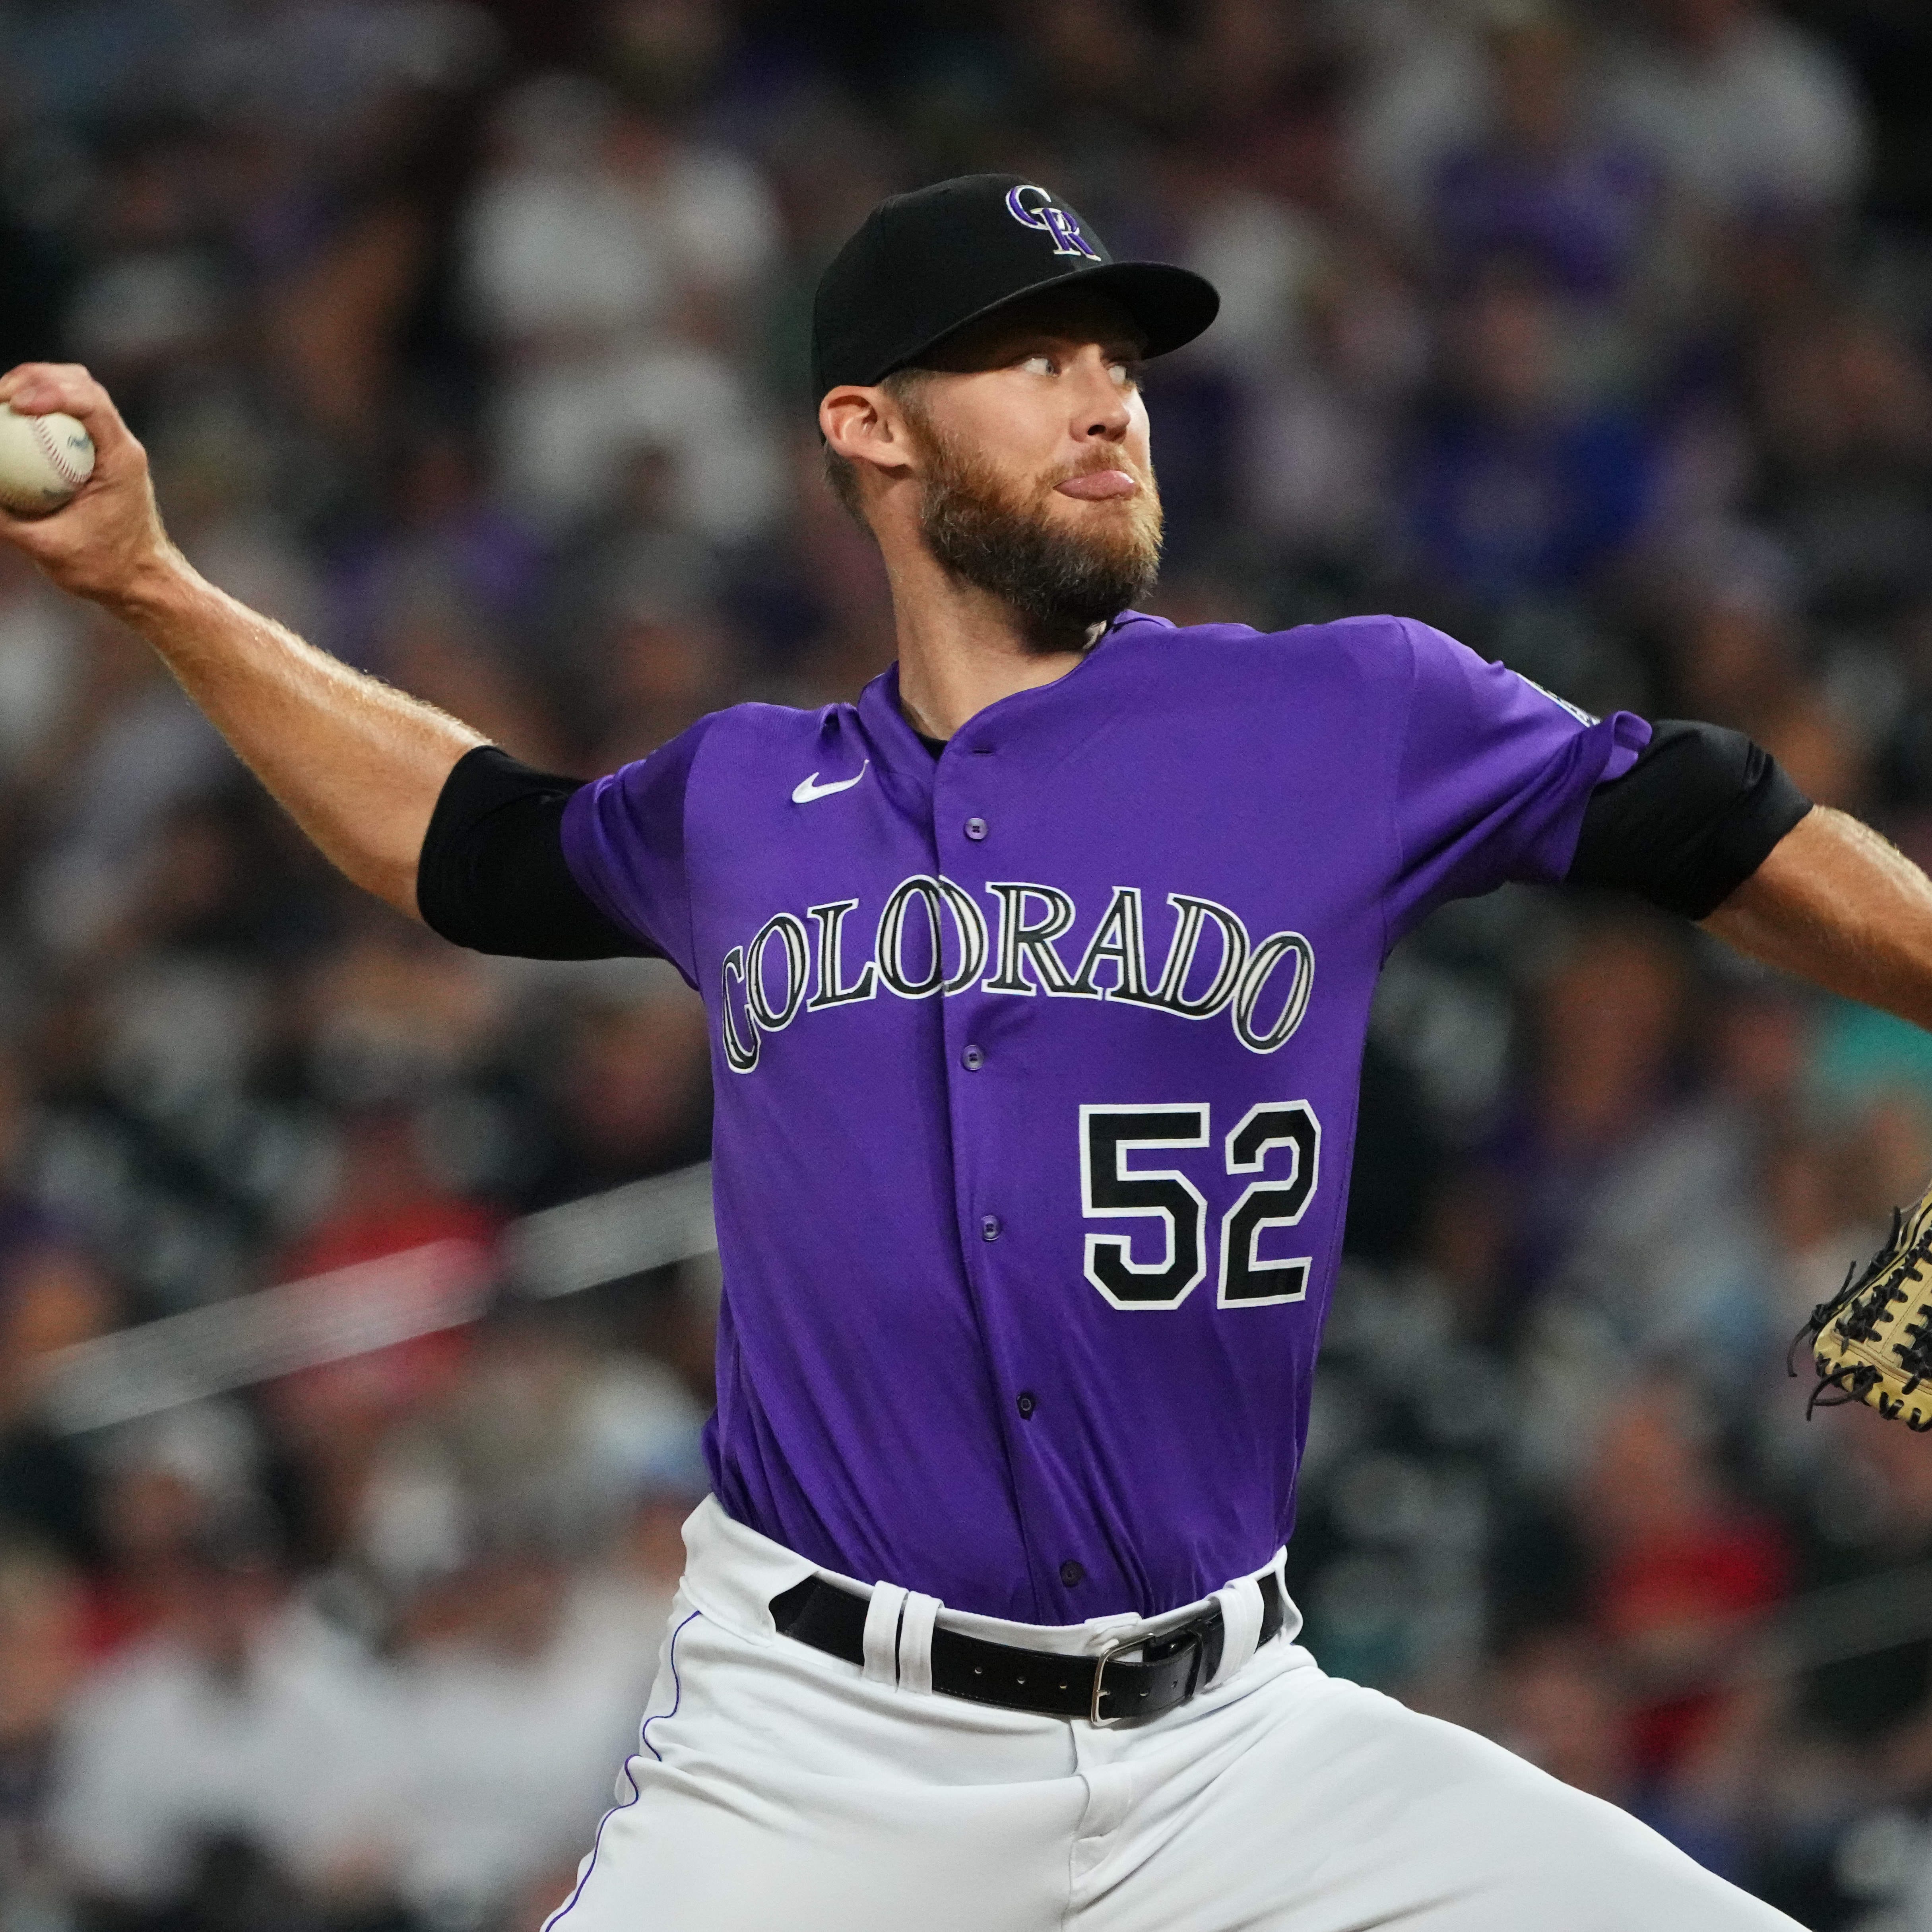 Rockies closer Daniel Bard has saved 32 games in 35 opportunities this season.